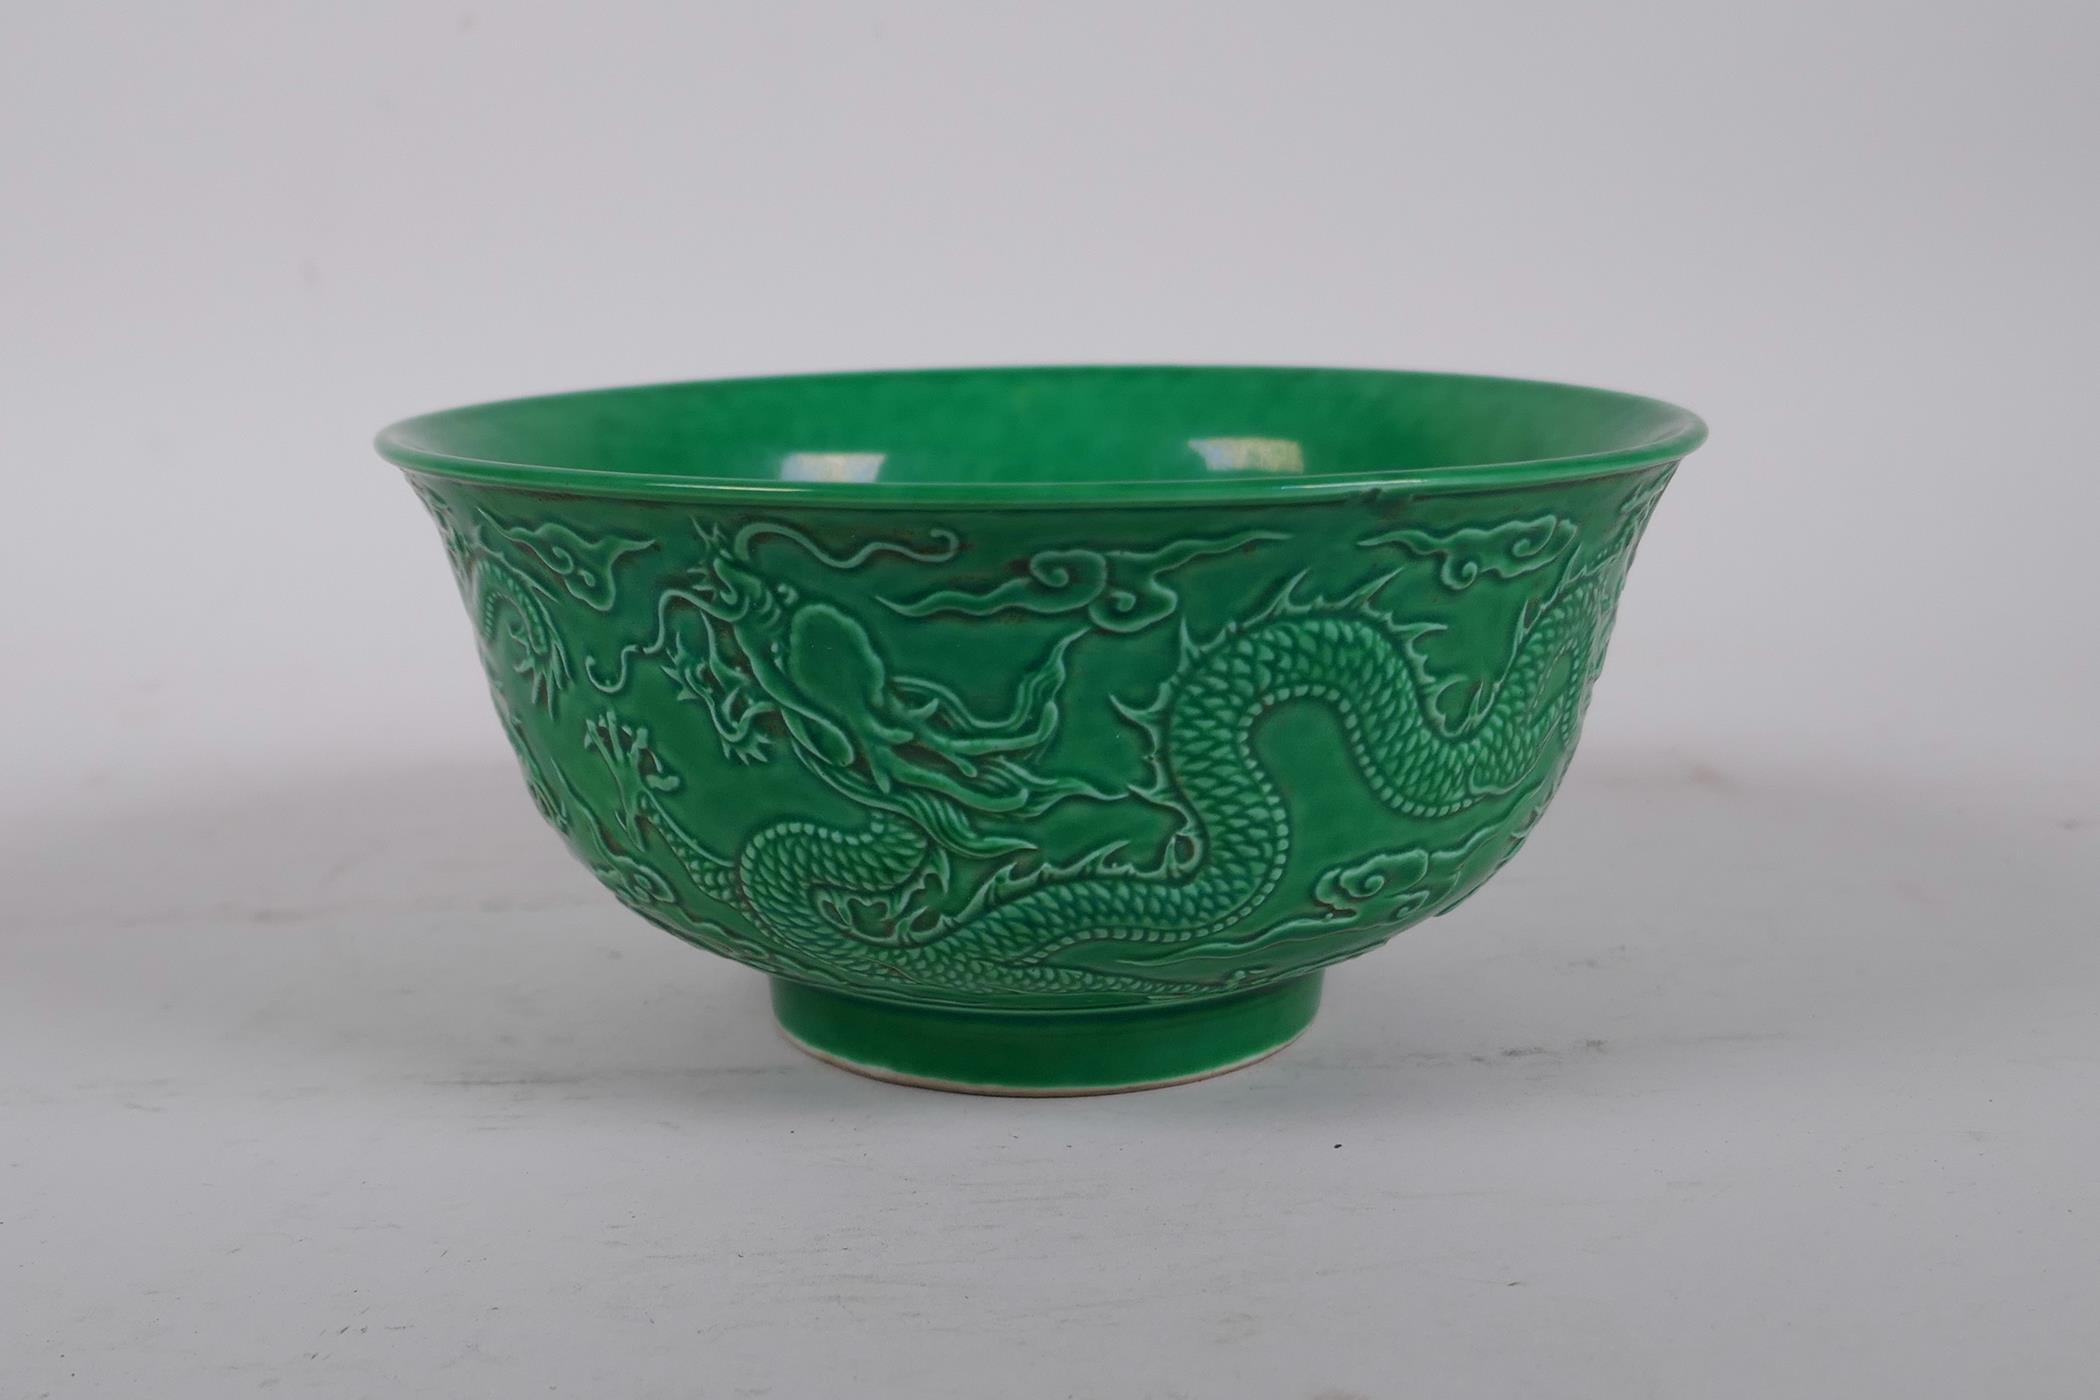 A Chinese green glazed porcelain rice bowl with raised dragon decoration, 6 character mark to